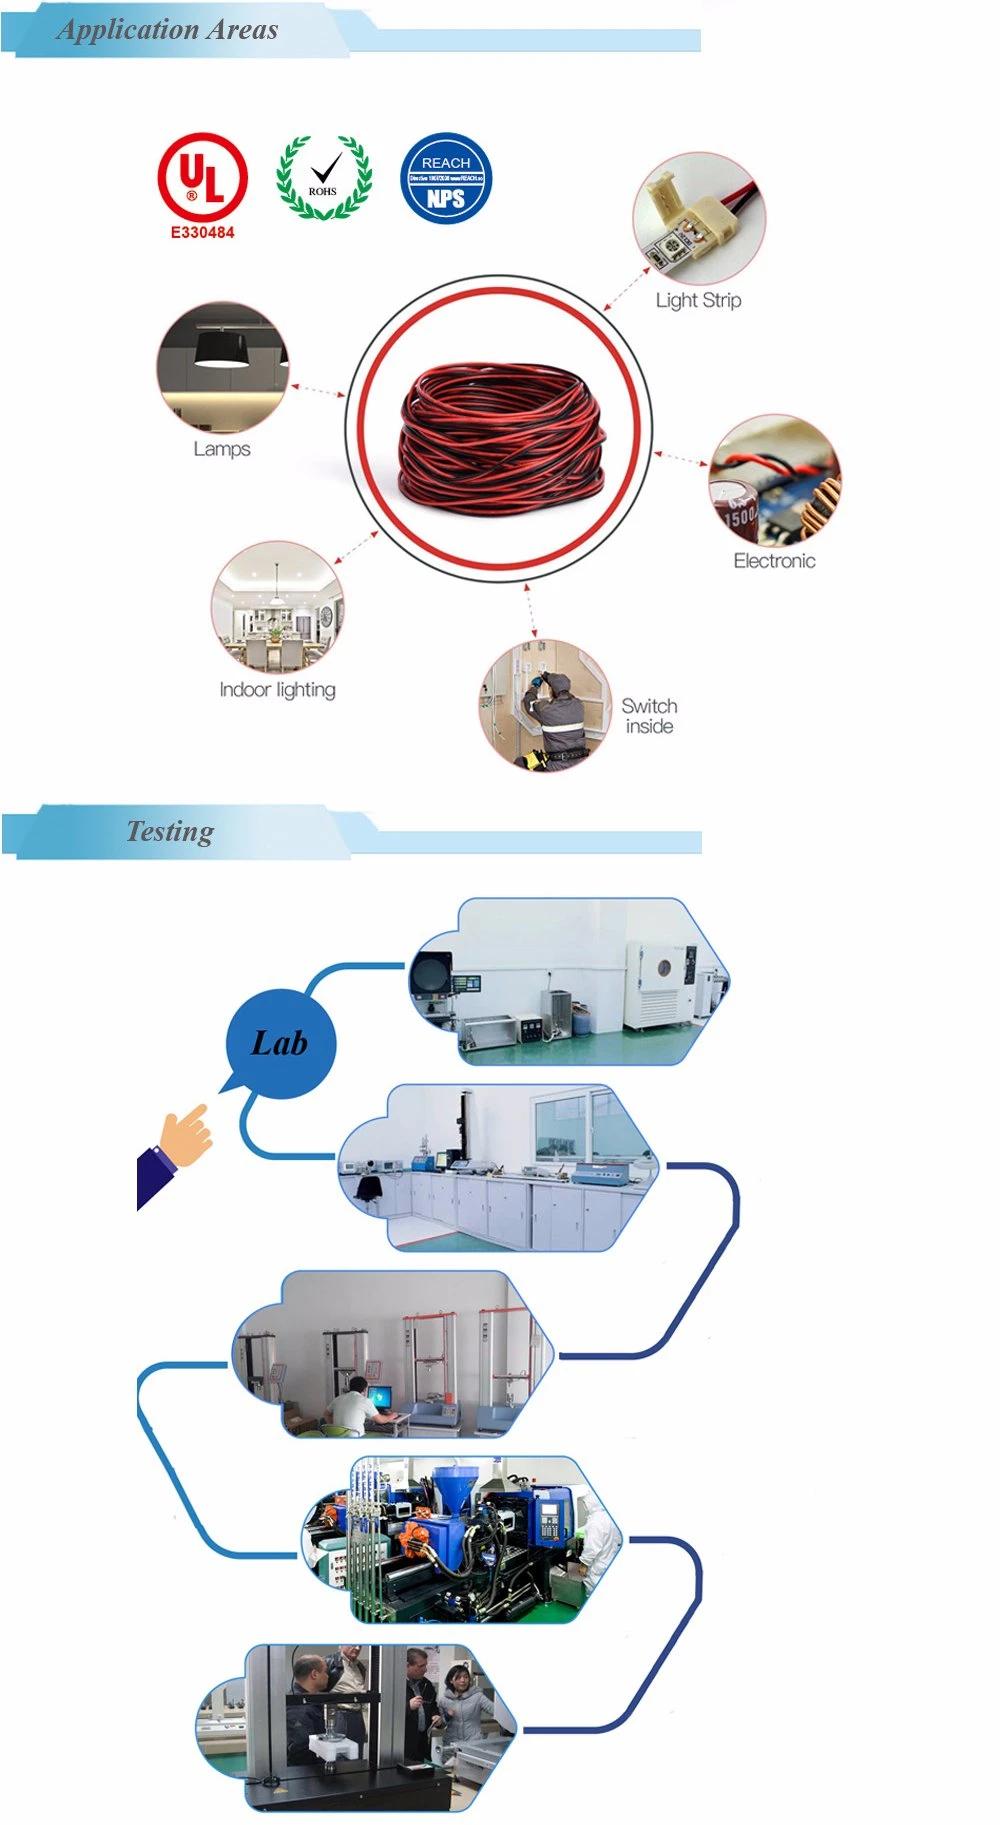 UL1032 FEP Insulation Copper Wires for Electronic Equipment Applications